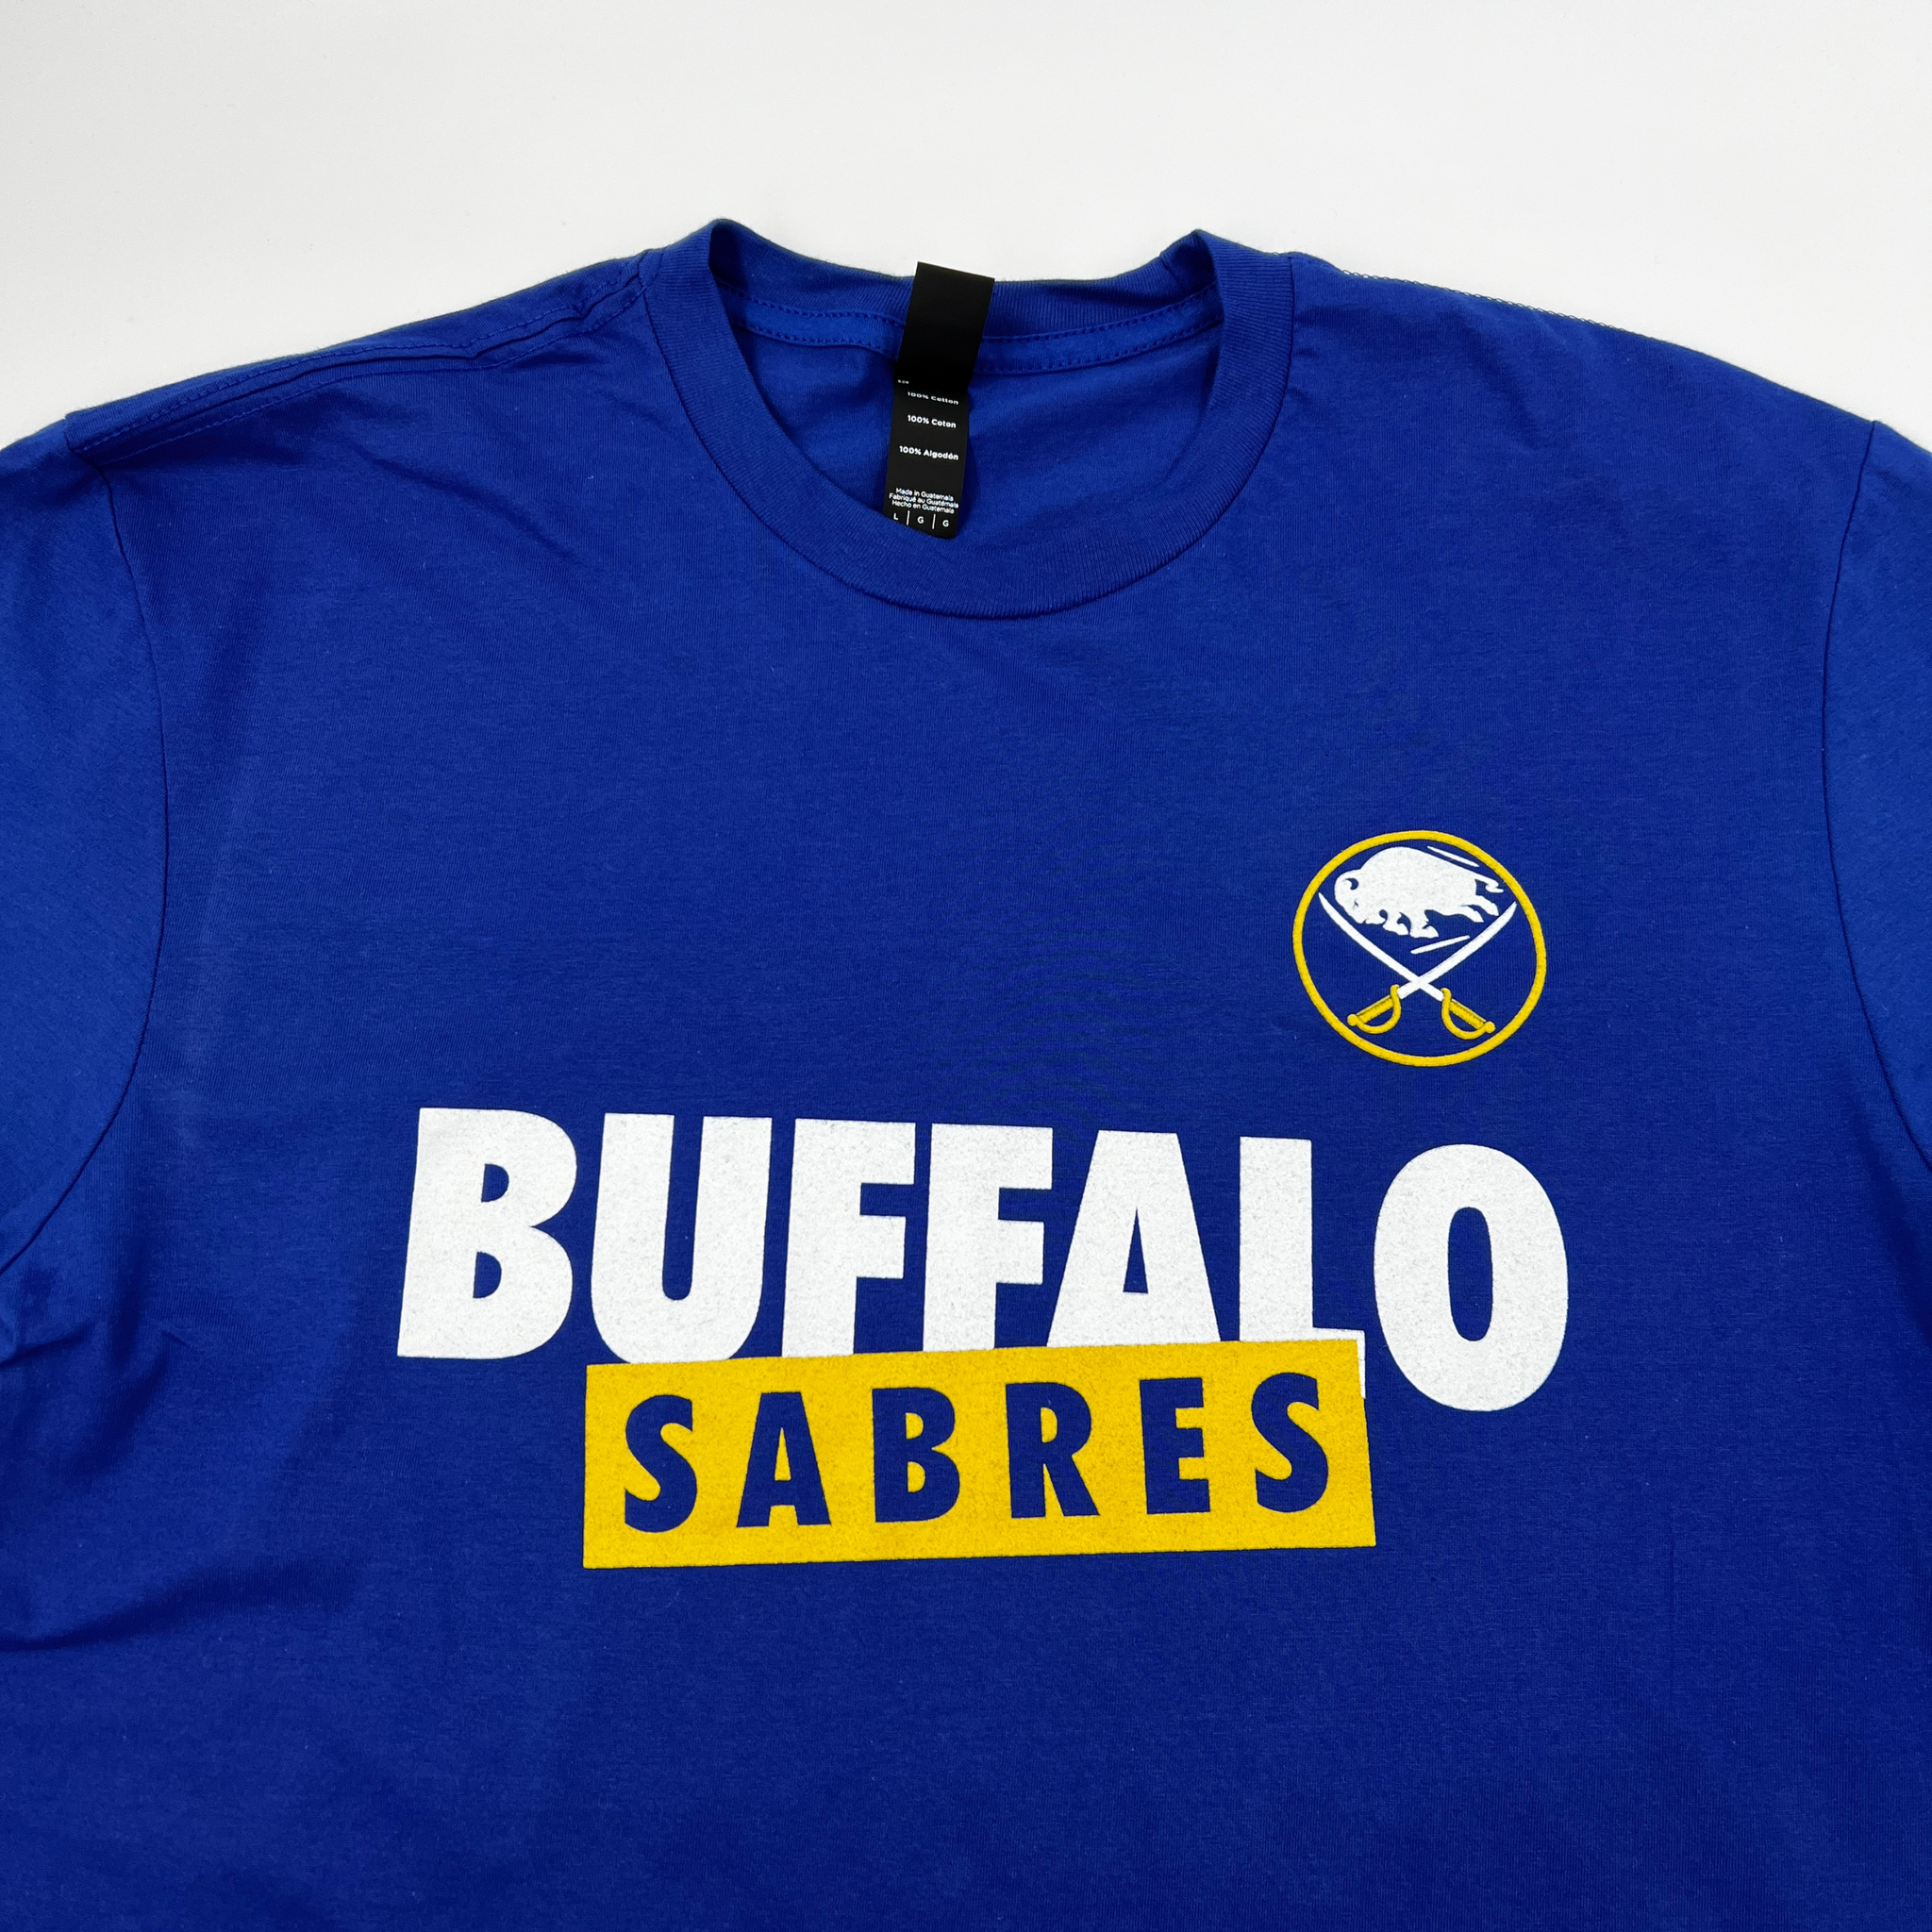 Buffalo Closet - Vintage Buffalo Sabres Crewneck. Size XL. Available in  Store and on Website / LINK IN BIO^^^ #BuffaloCloset #Vintage  #VintageClothing #ShopMyCloset #WWVSE #VintageBuffalo #NHL #Buffalo #Sabres  #BuffaloSabres #Hockey